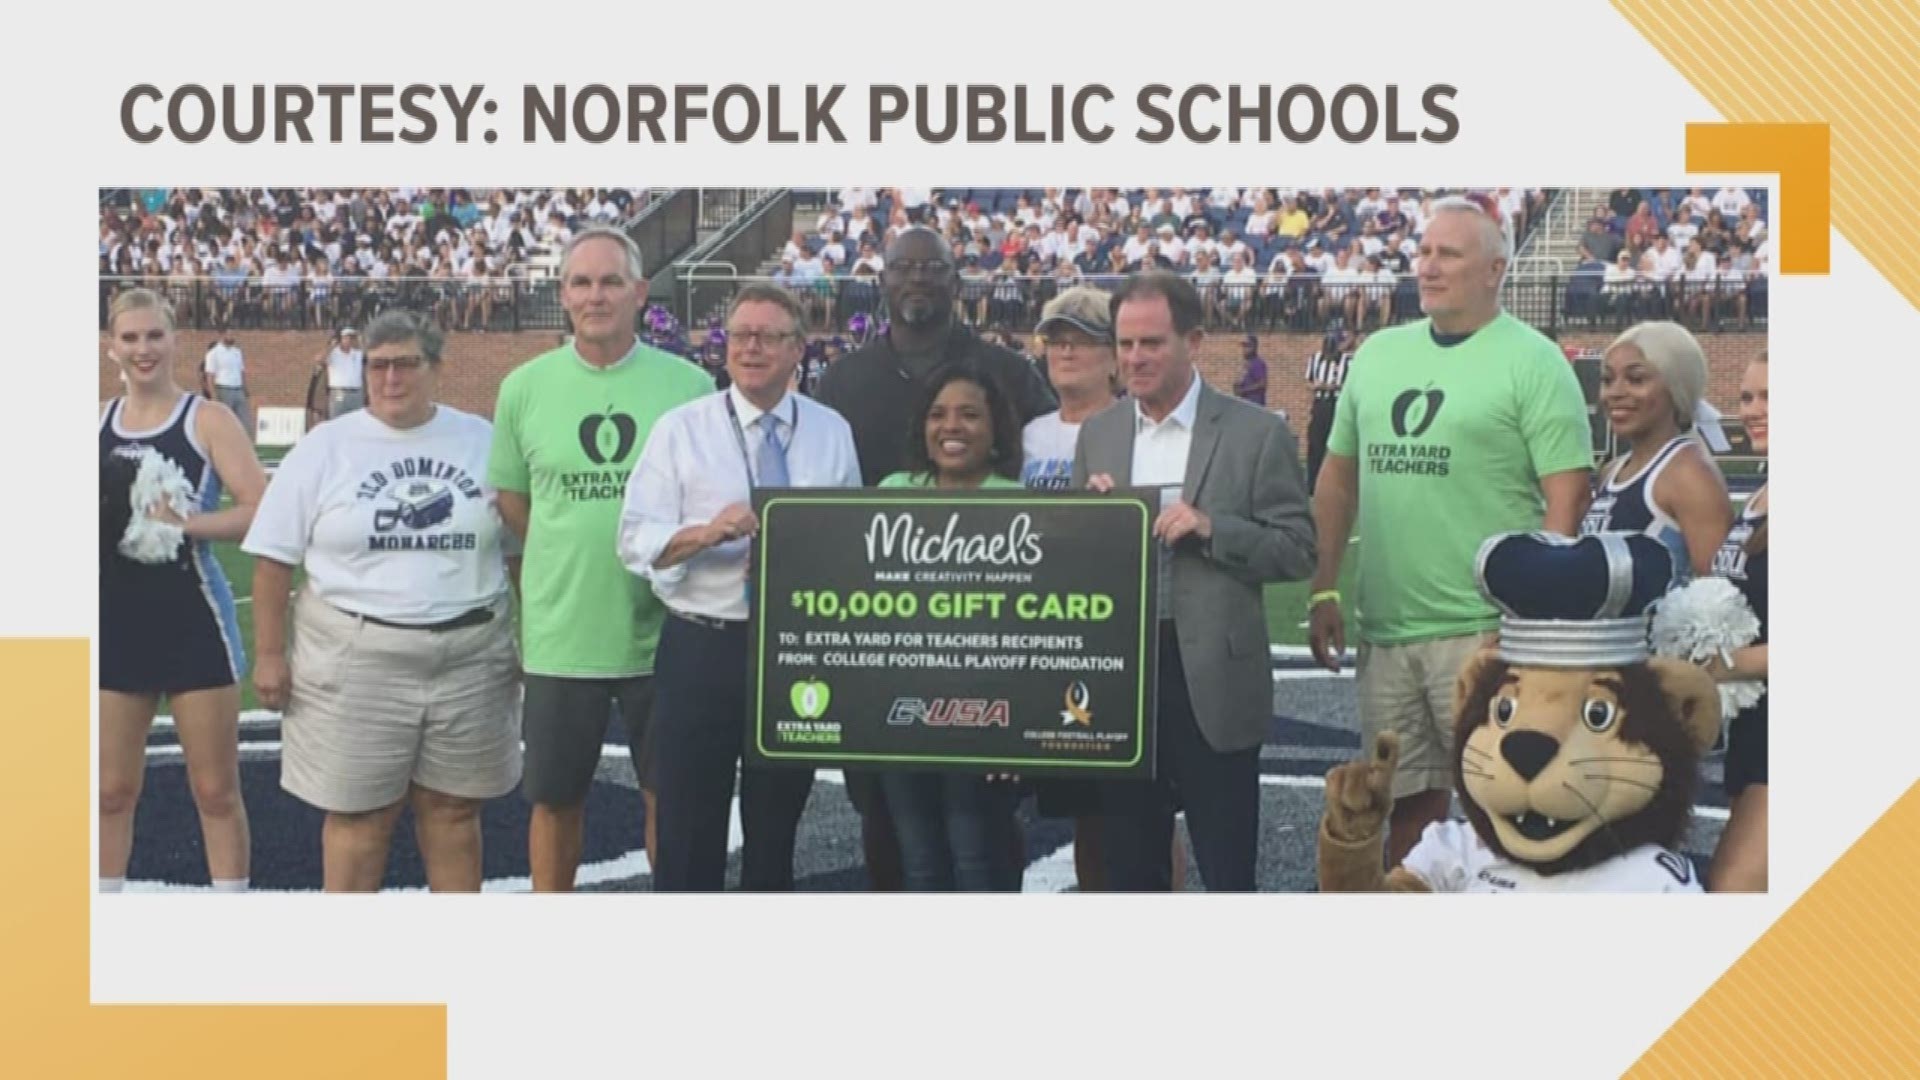 Michael’s Arts and Crafts gave its annual $10,000 “Extra Yard for Teachers” grant to support Norfolk Public Schools teachers.